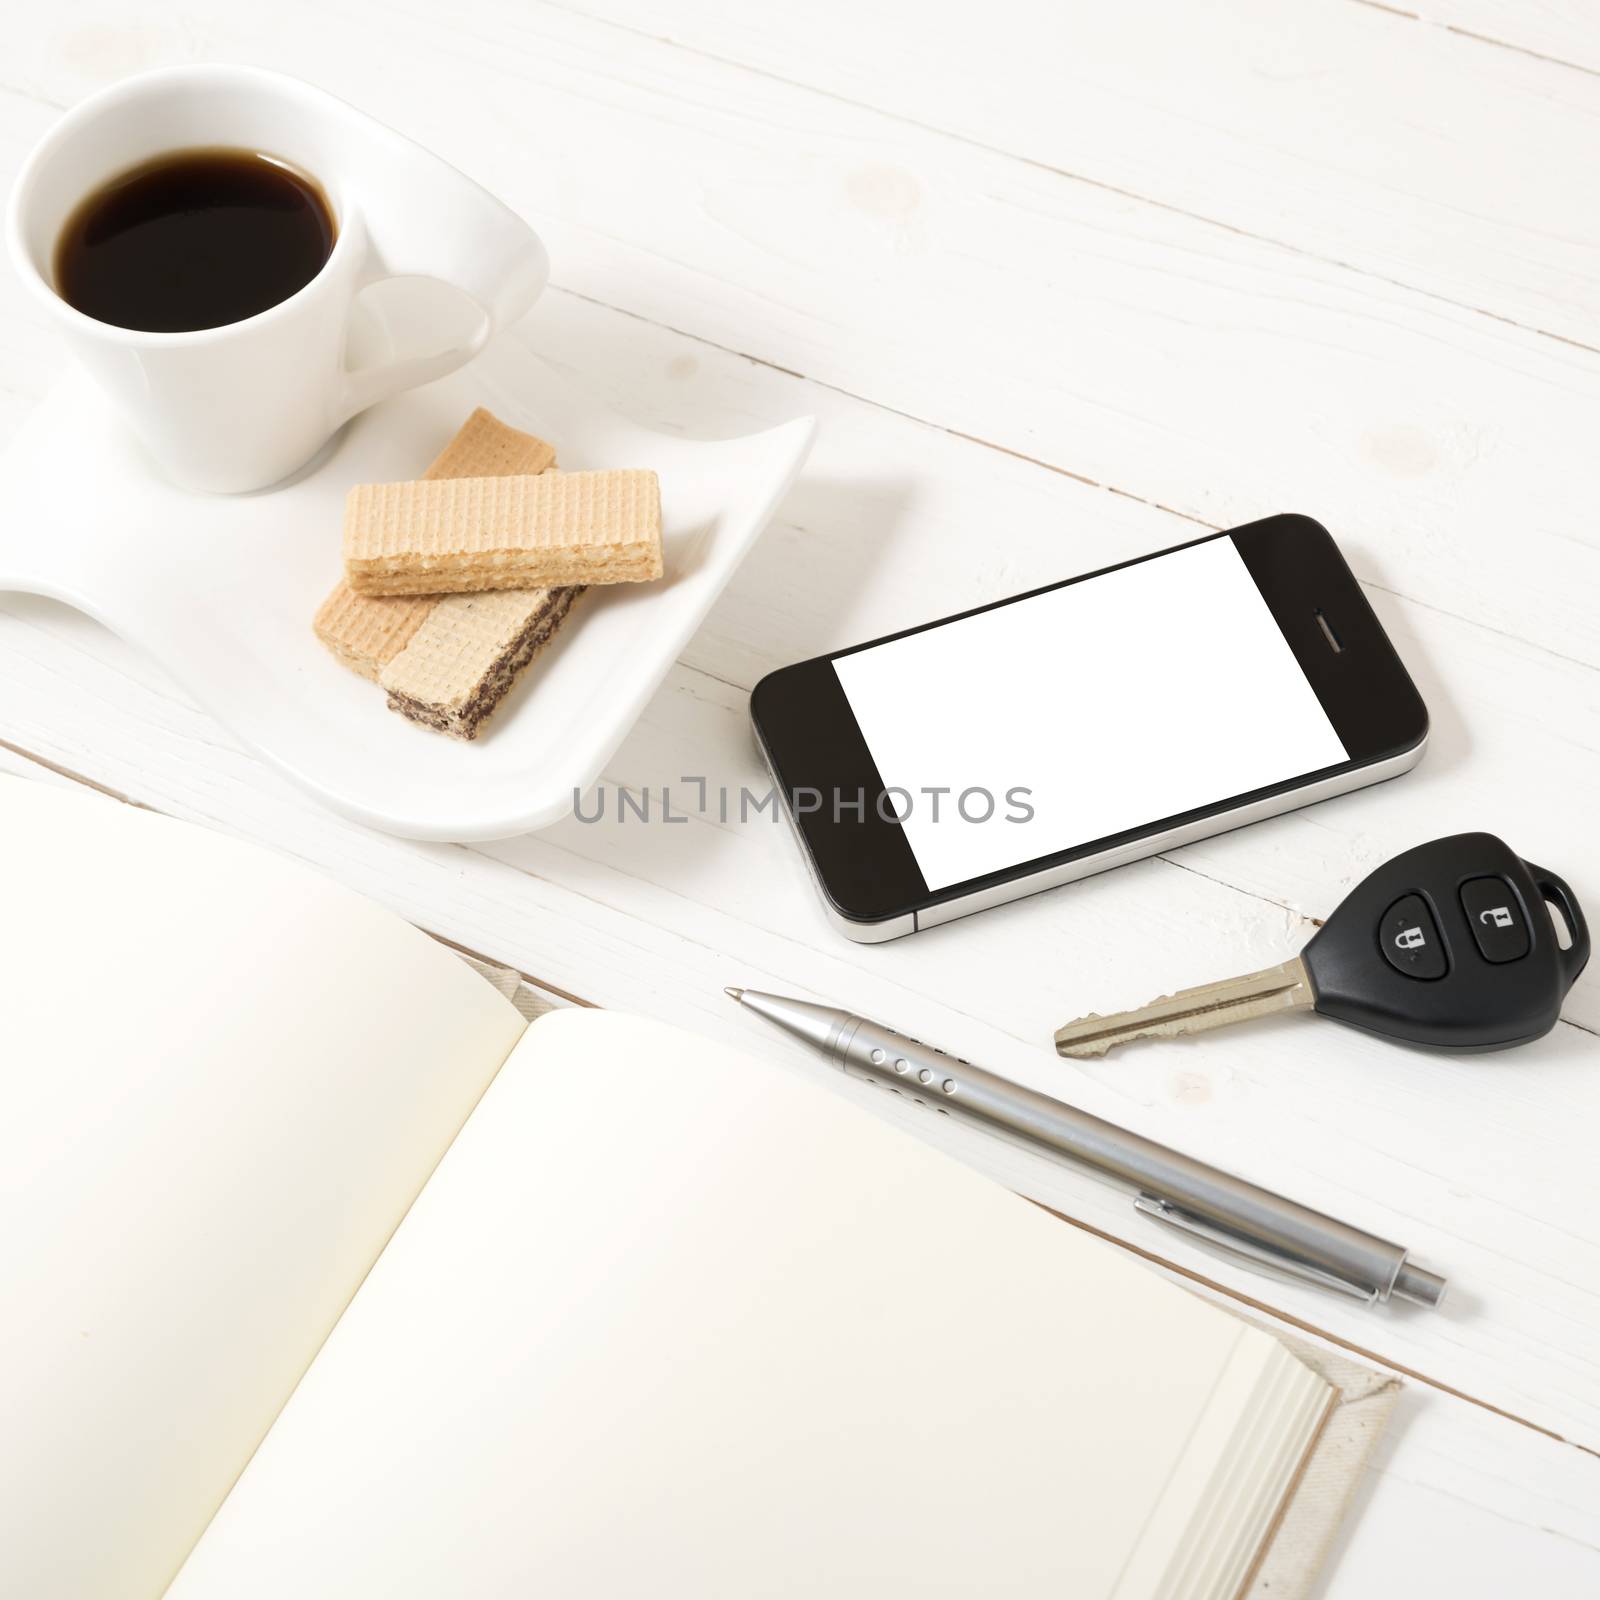 coffee cup with wafer,phone,car key,notebook on white wood background